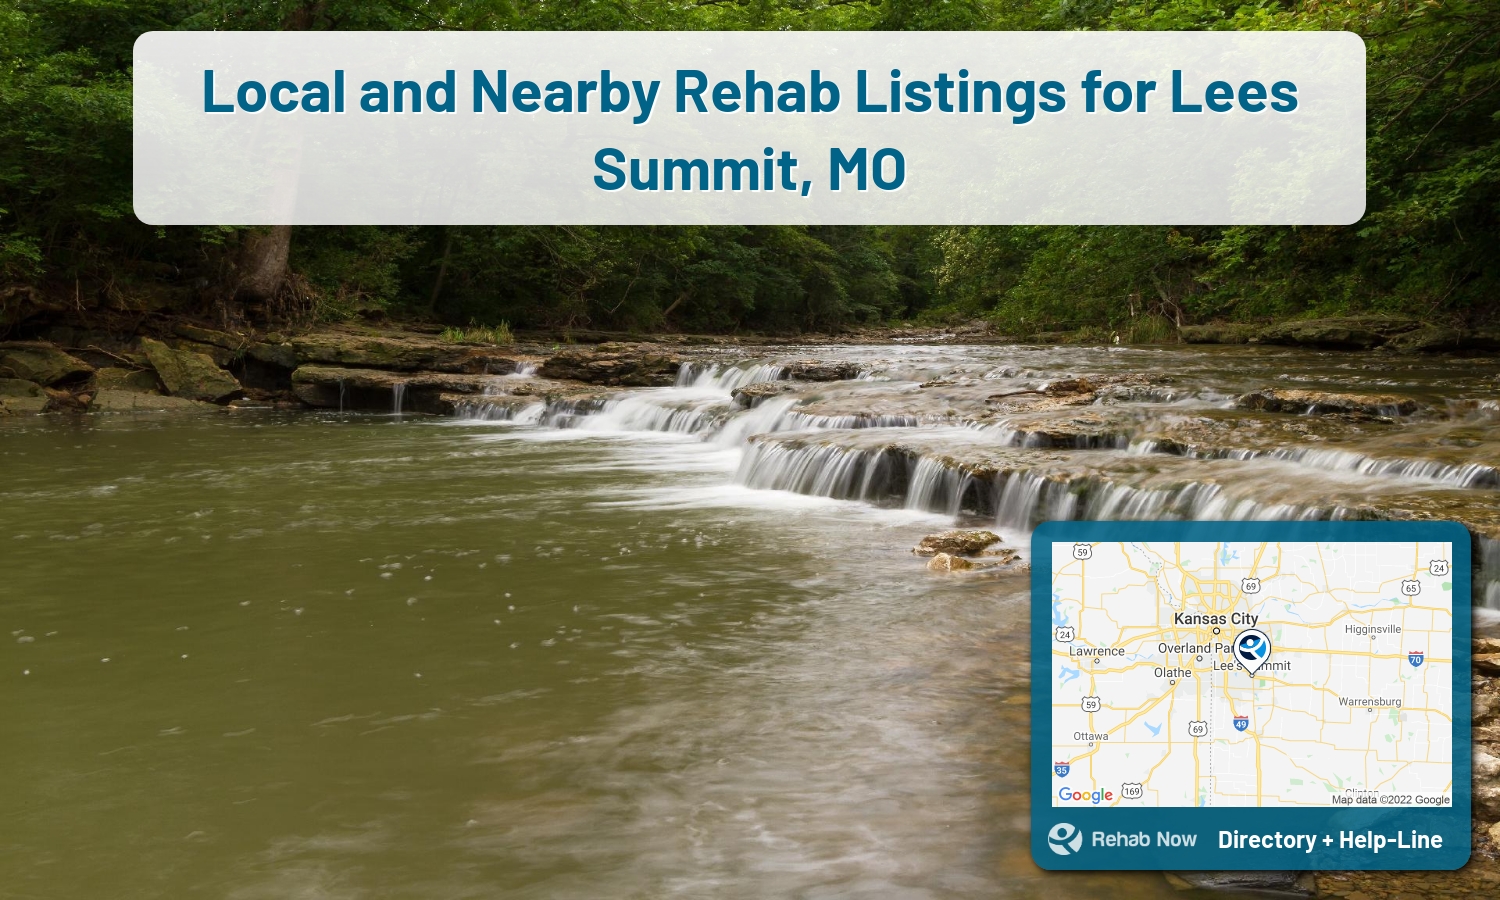 Lees Summit, MO Treatment Centers. Find drug rehab in Lees Summit, Missouri, or detox and treatment programs. Get the right help now!